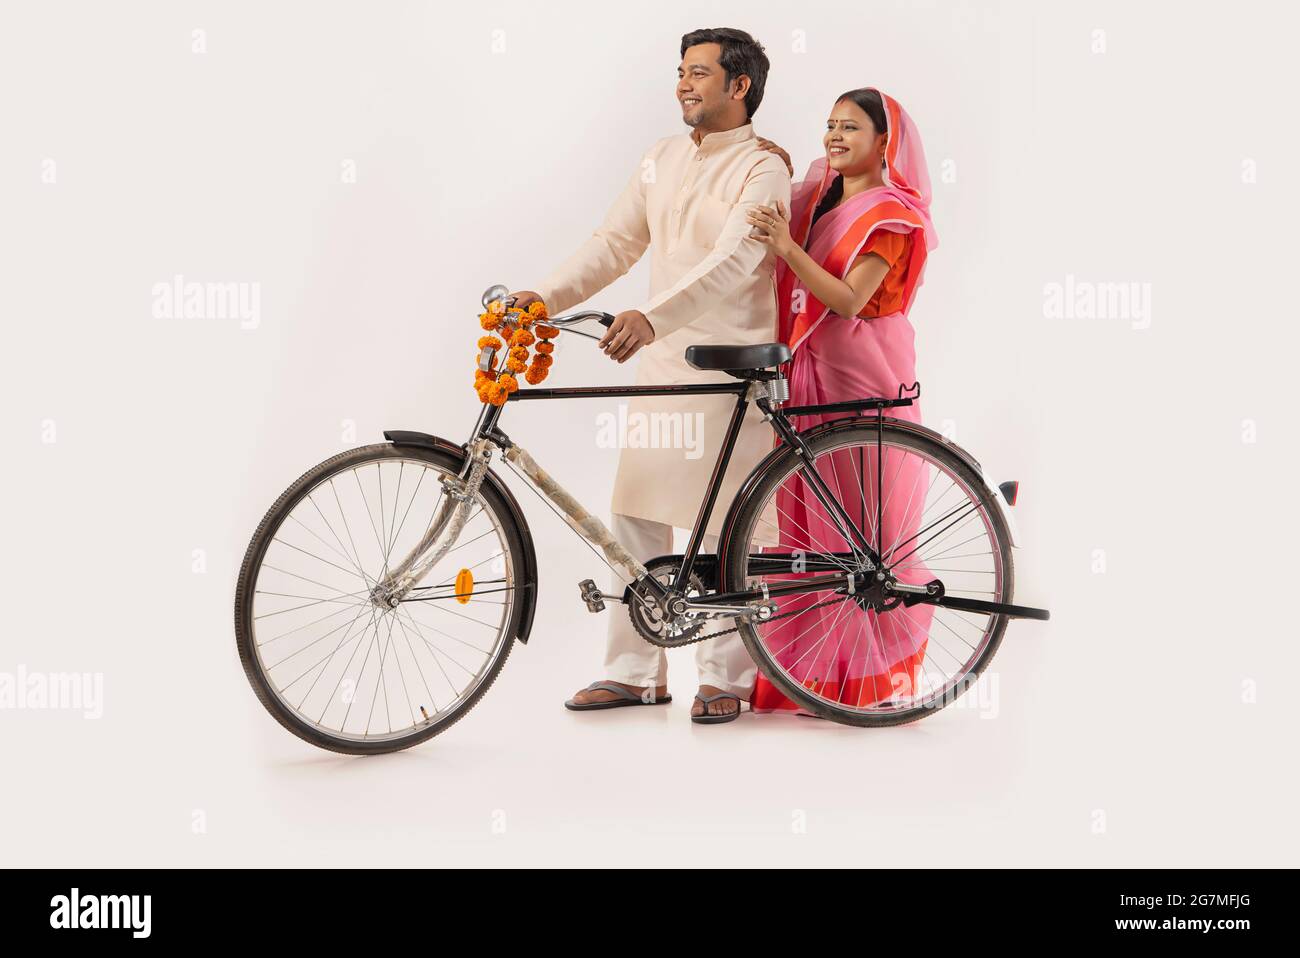 A RURAL COUPLE LOOKING AHEAD WHILE STANDING WITH NEW BICYCLE Stock Photo